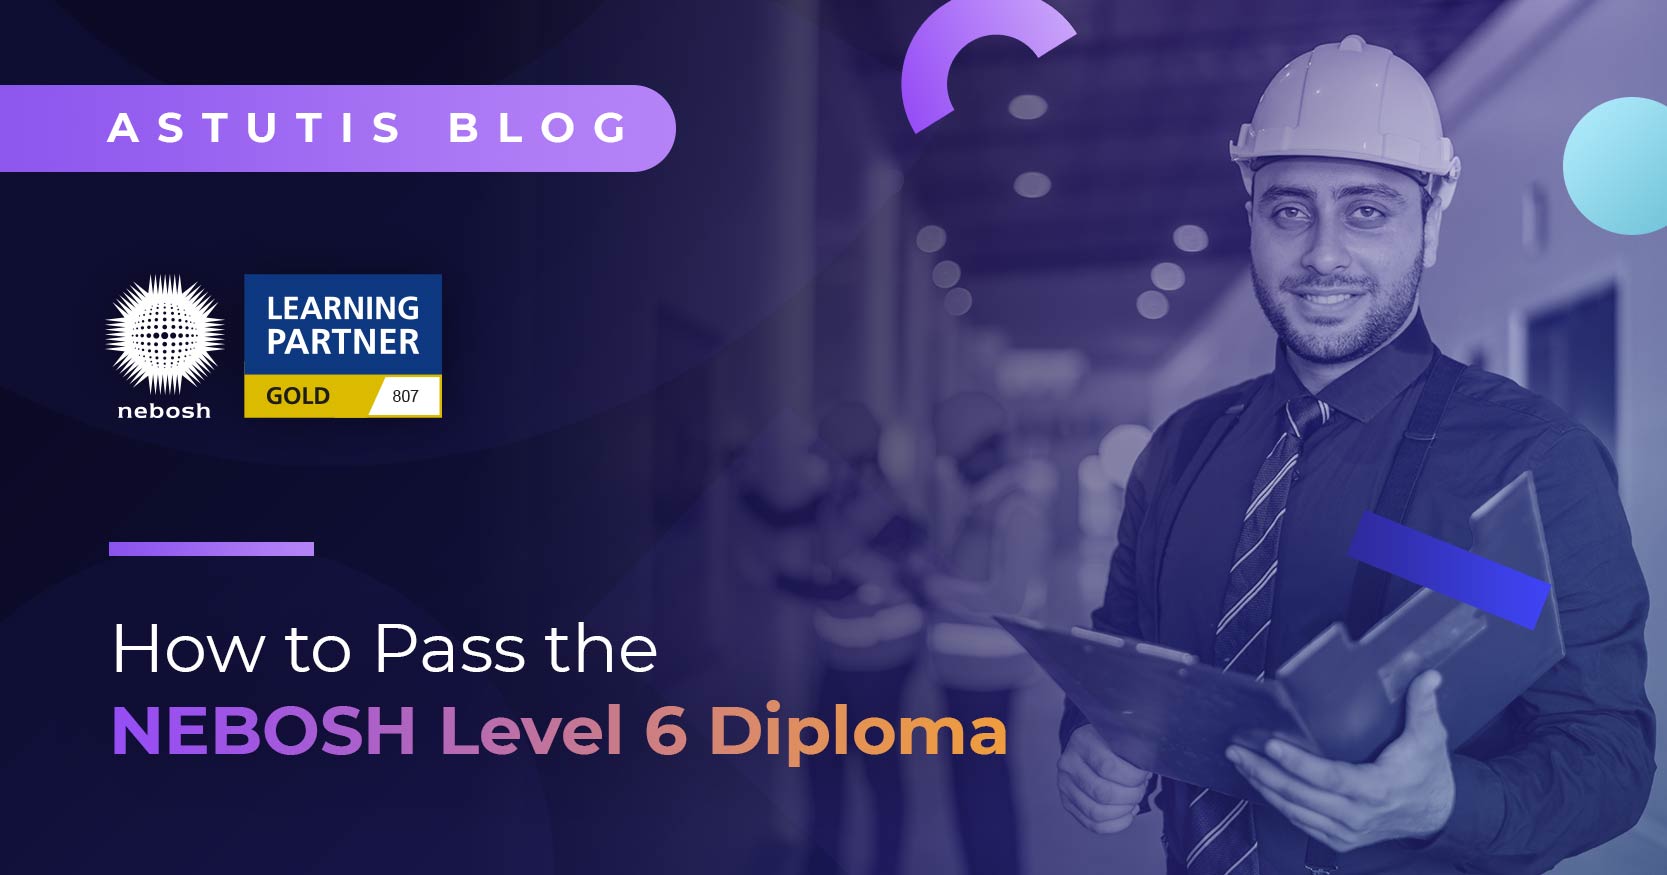 How To Pass The NEBOSH Level 6 Diploma  Image